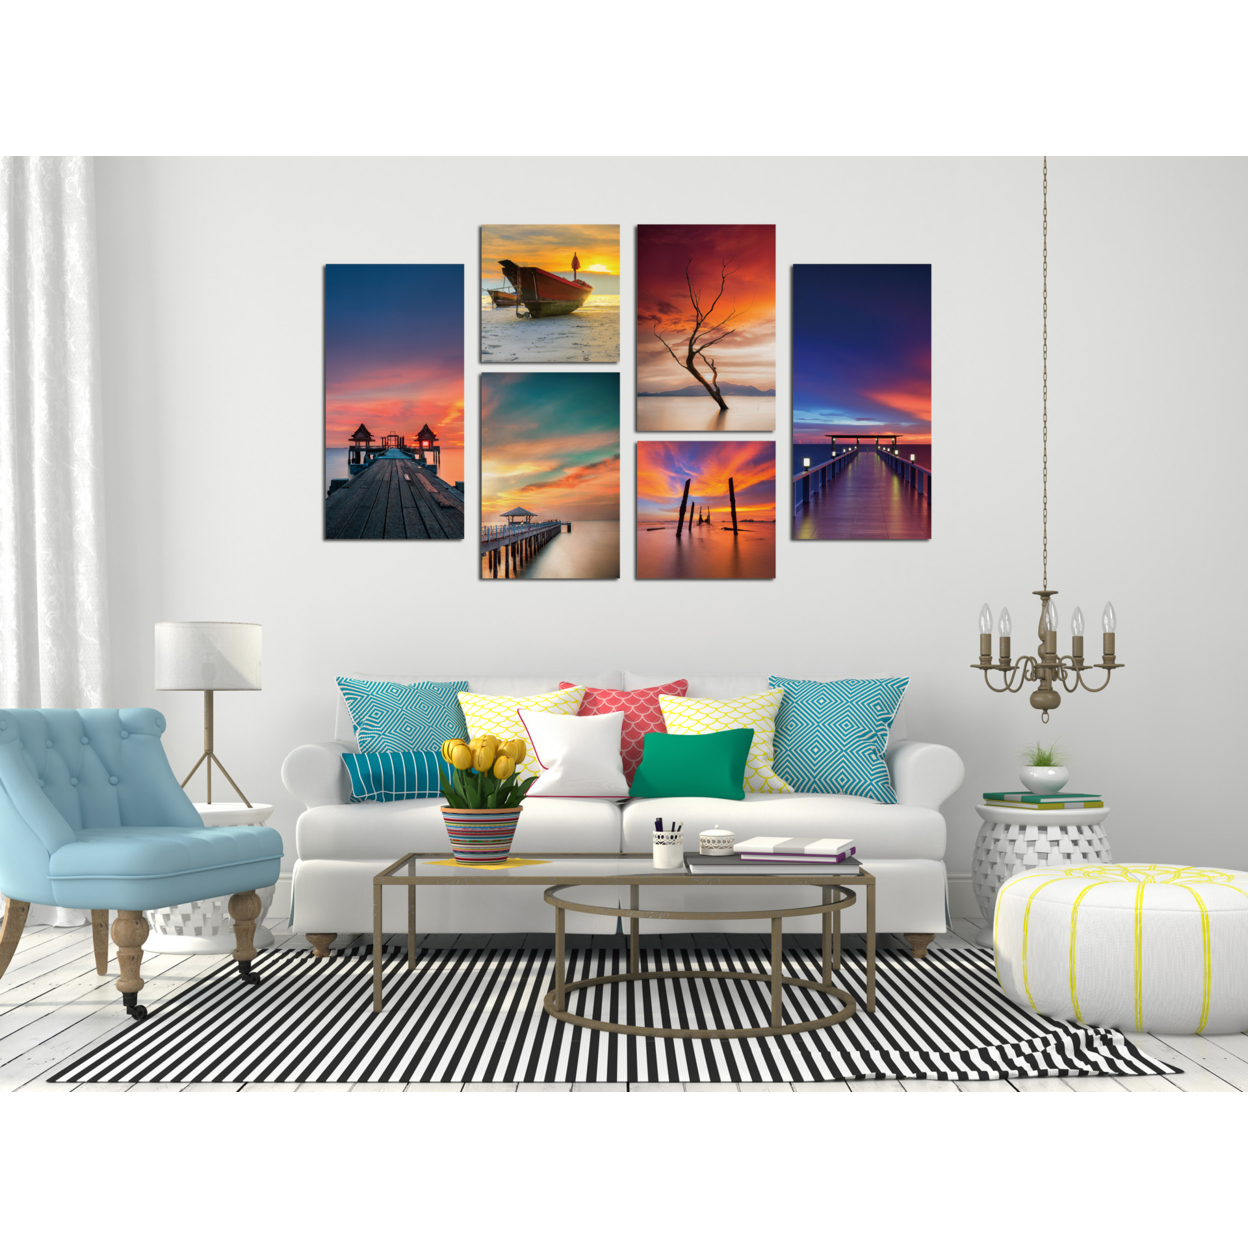 Ocean View 6 Piece Wrapped Canvas Wall Art Print 40x64 Inches